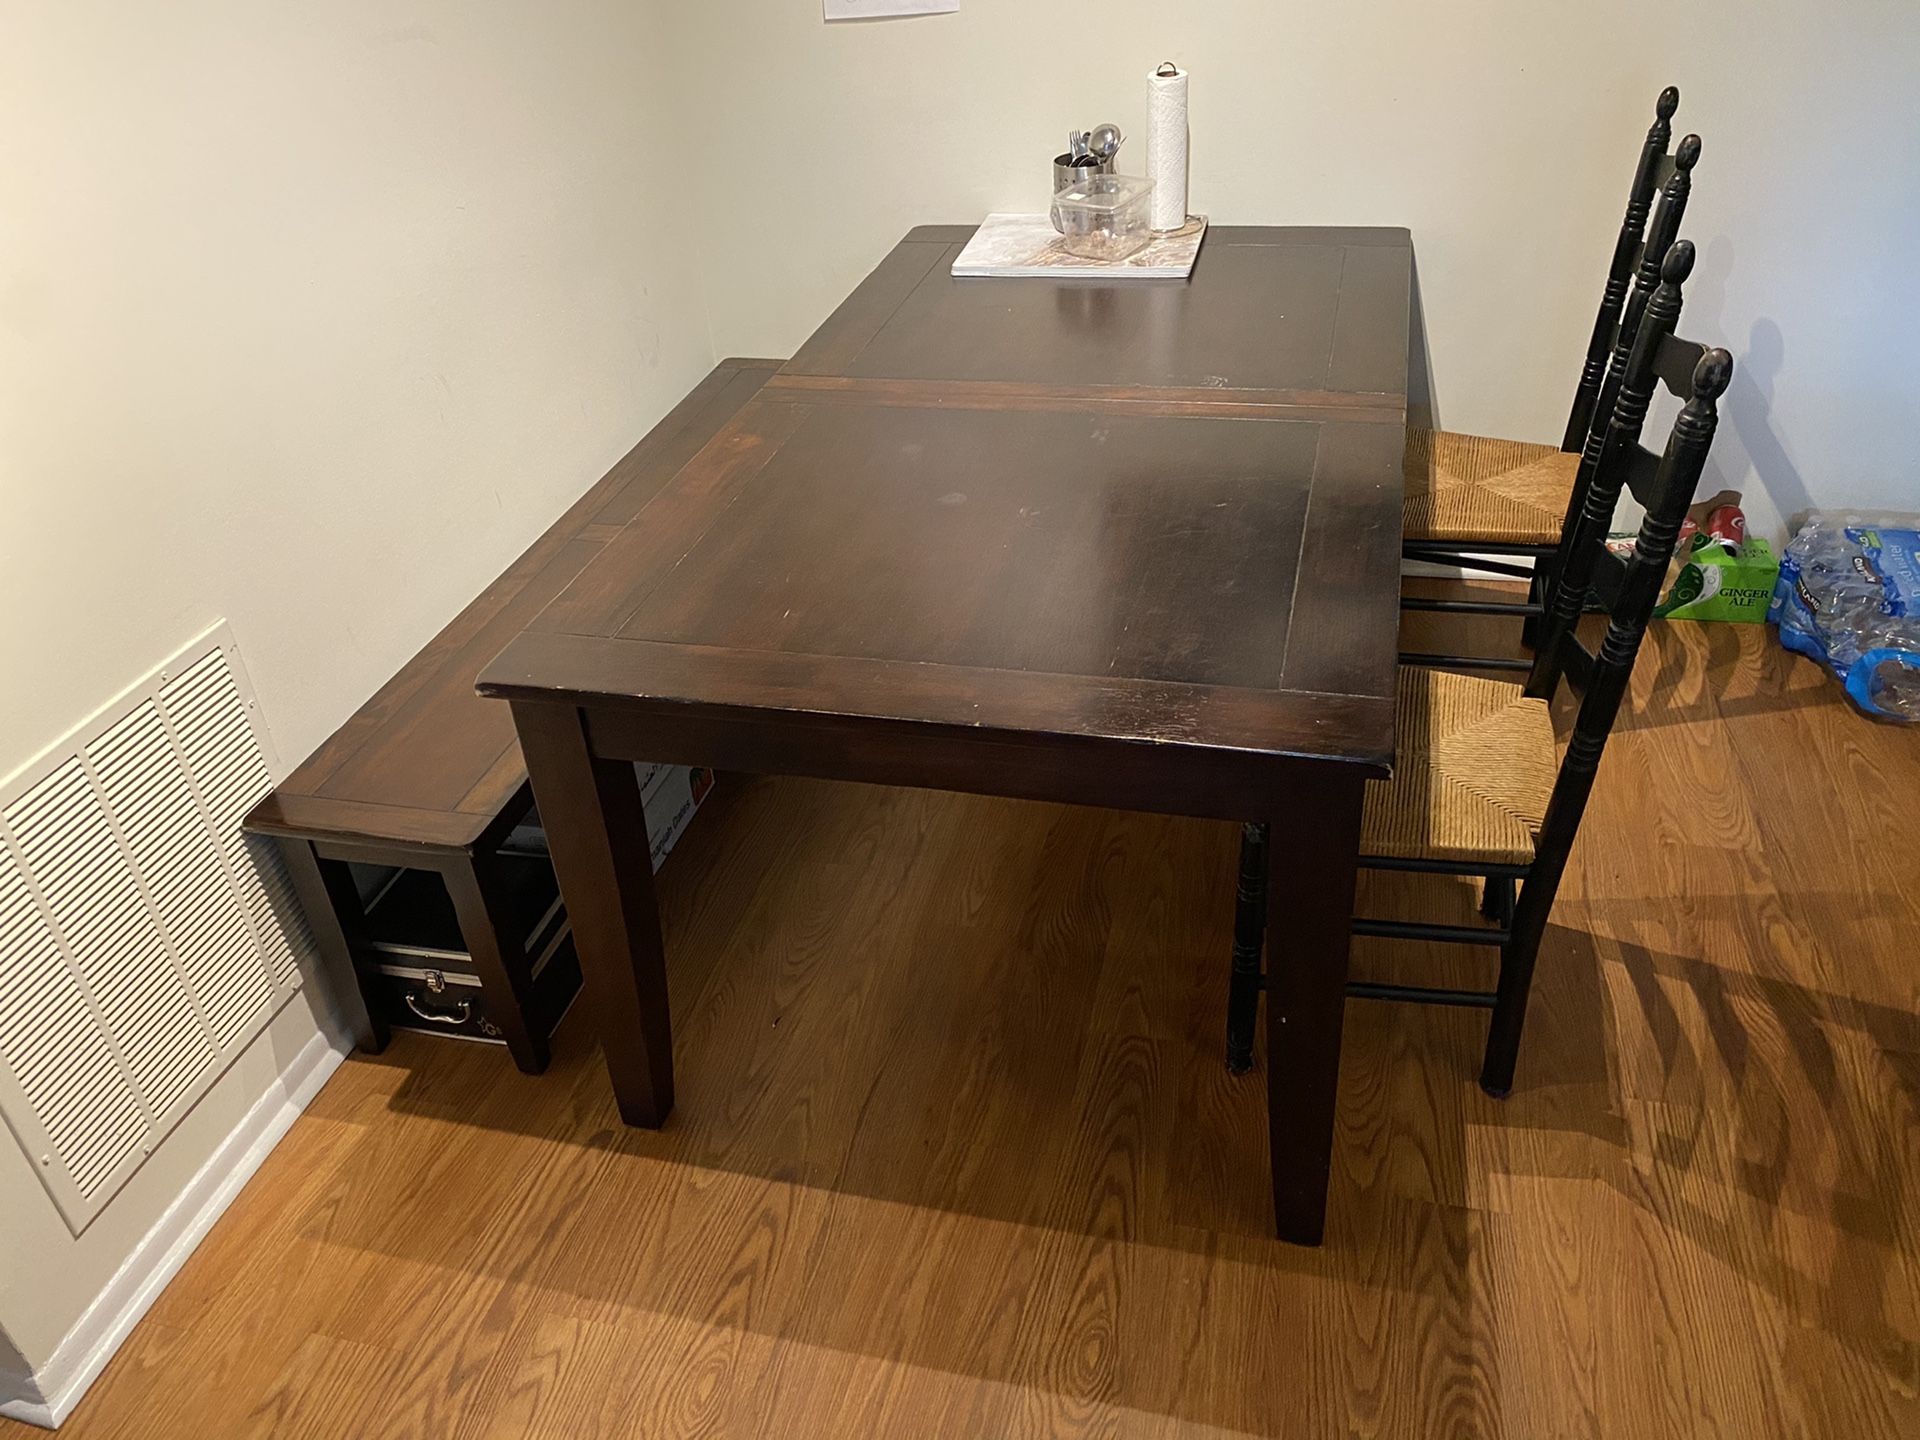 Dining table with bench & chairs